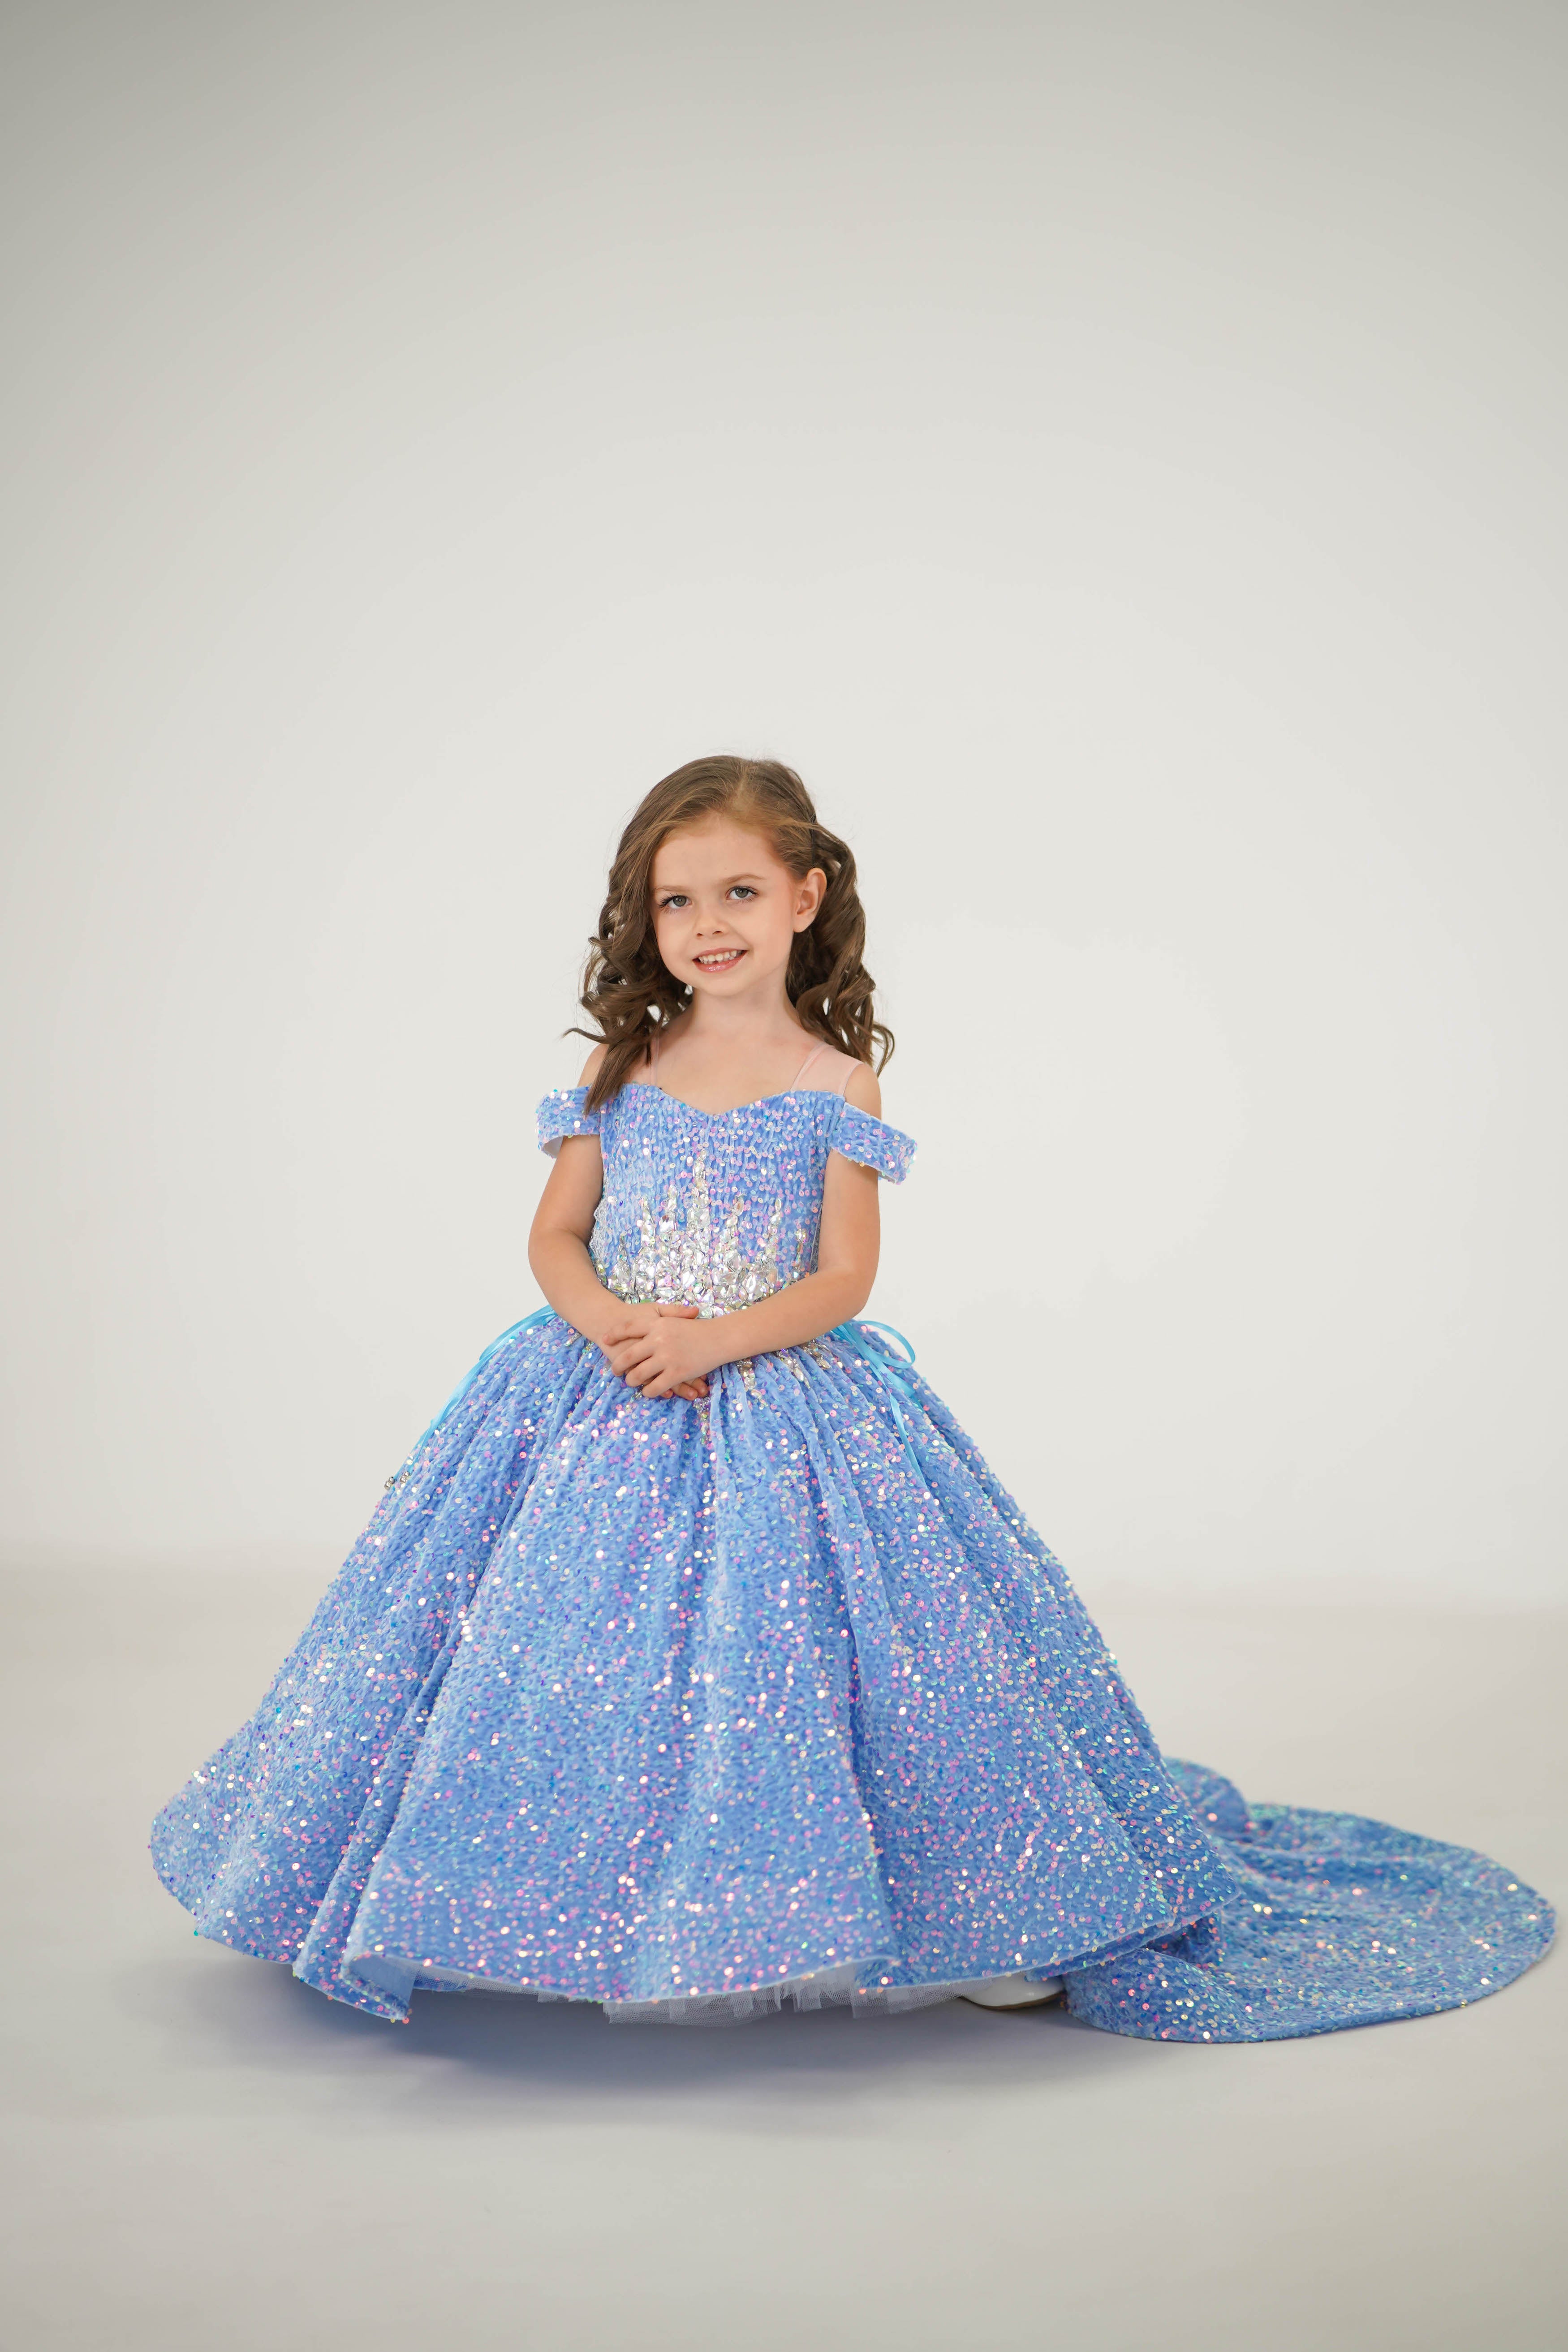 Girls Wedding Dress Bridesmaid Formal Long Gown Lace Princess Party Prom  Dresses for Girls 4-14 Years - Walmart.com